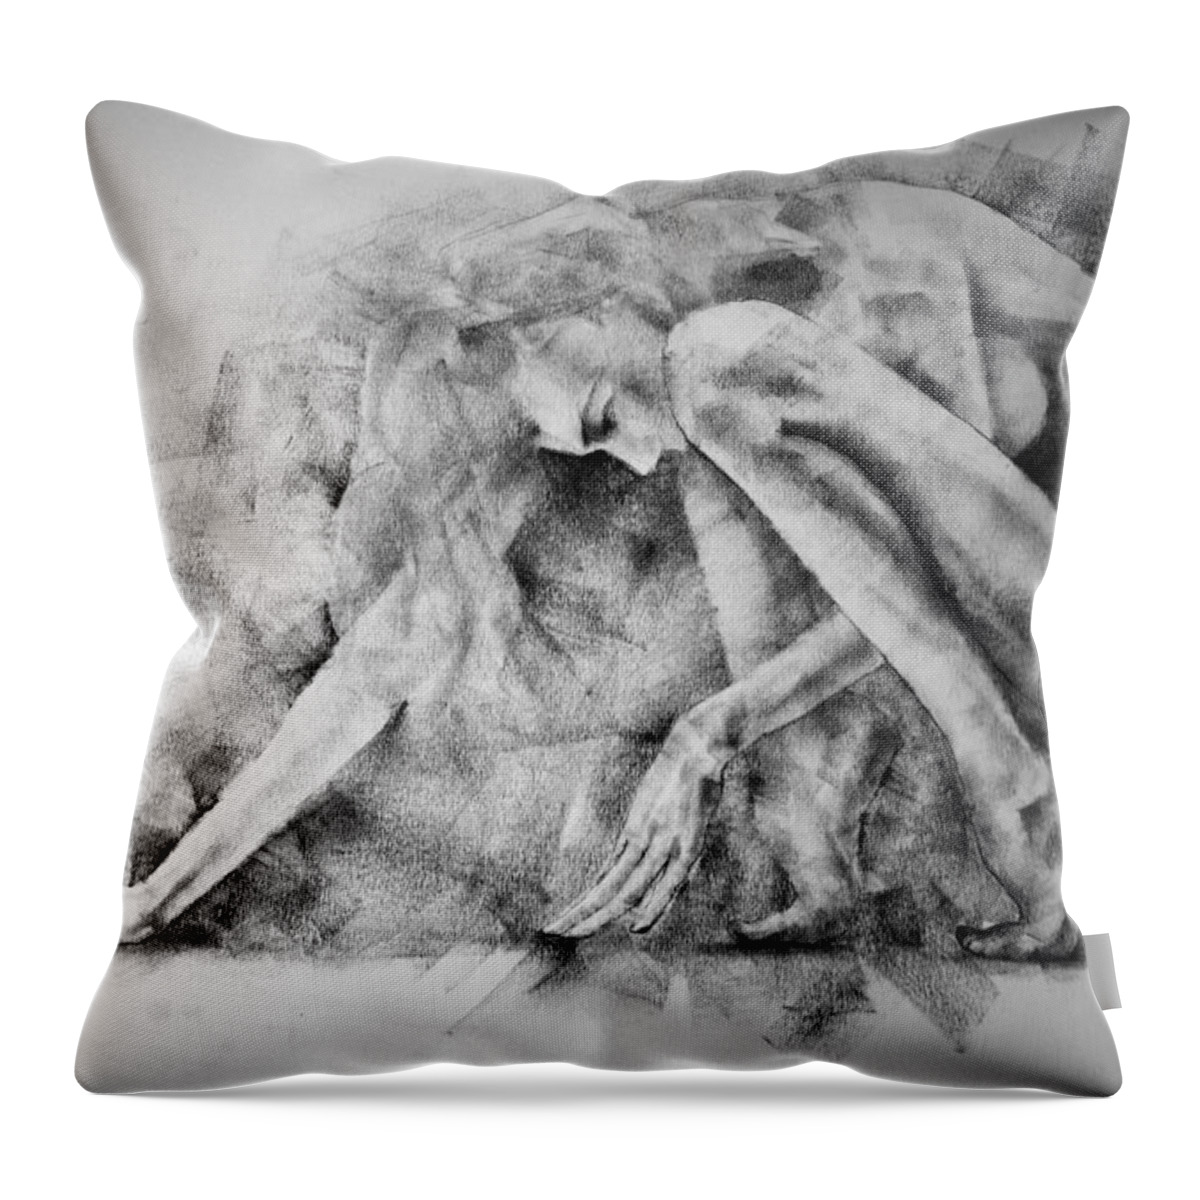 Erotic Throw Pillow featuring the drawing Page 5 by Dimitar Hristov